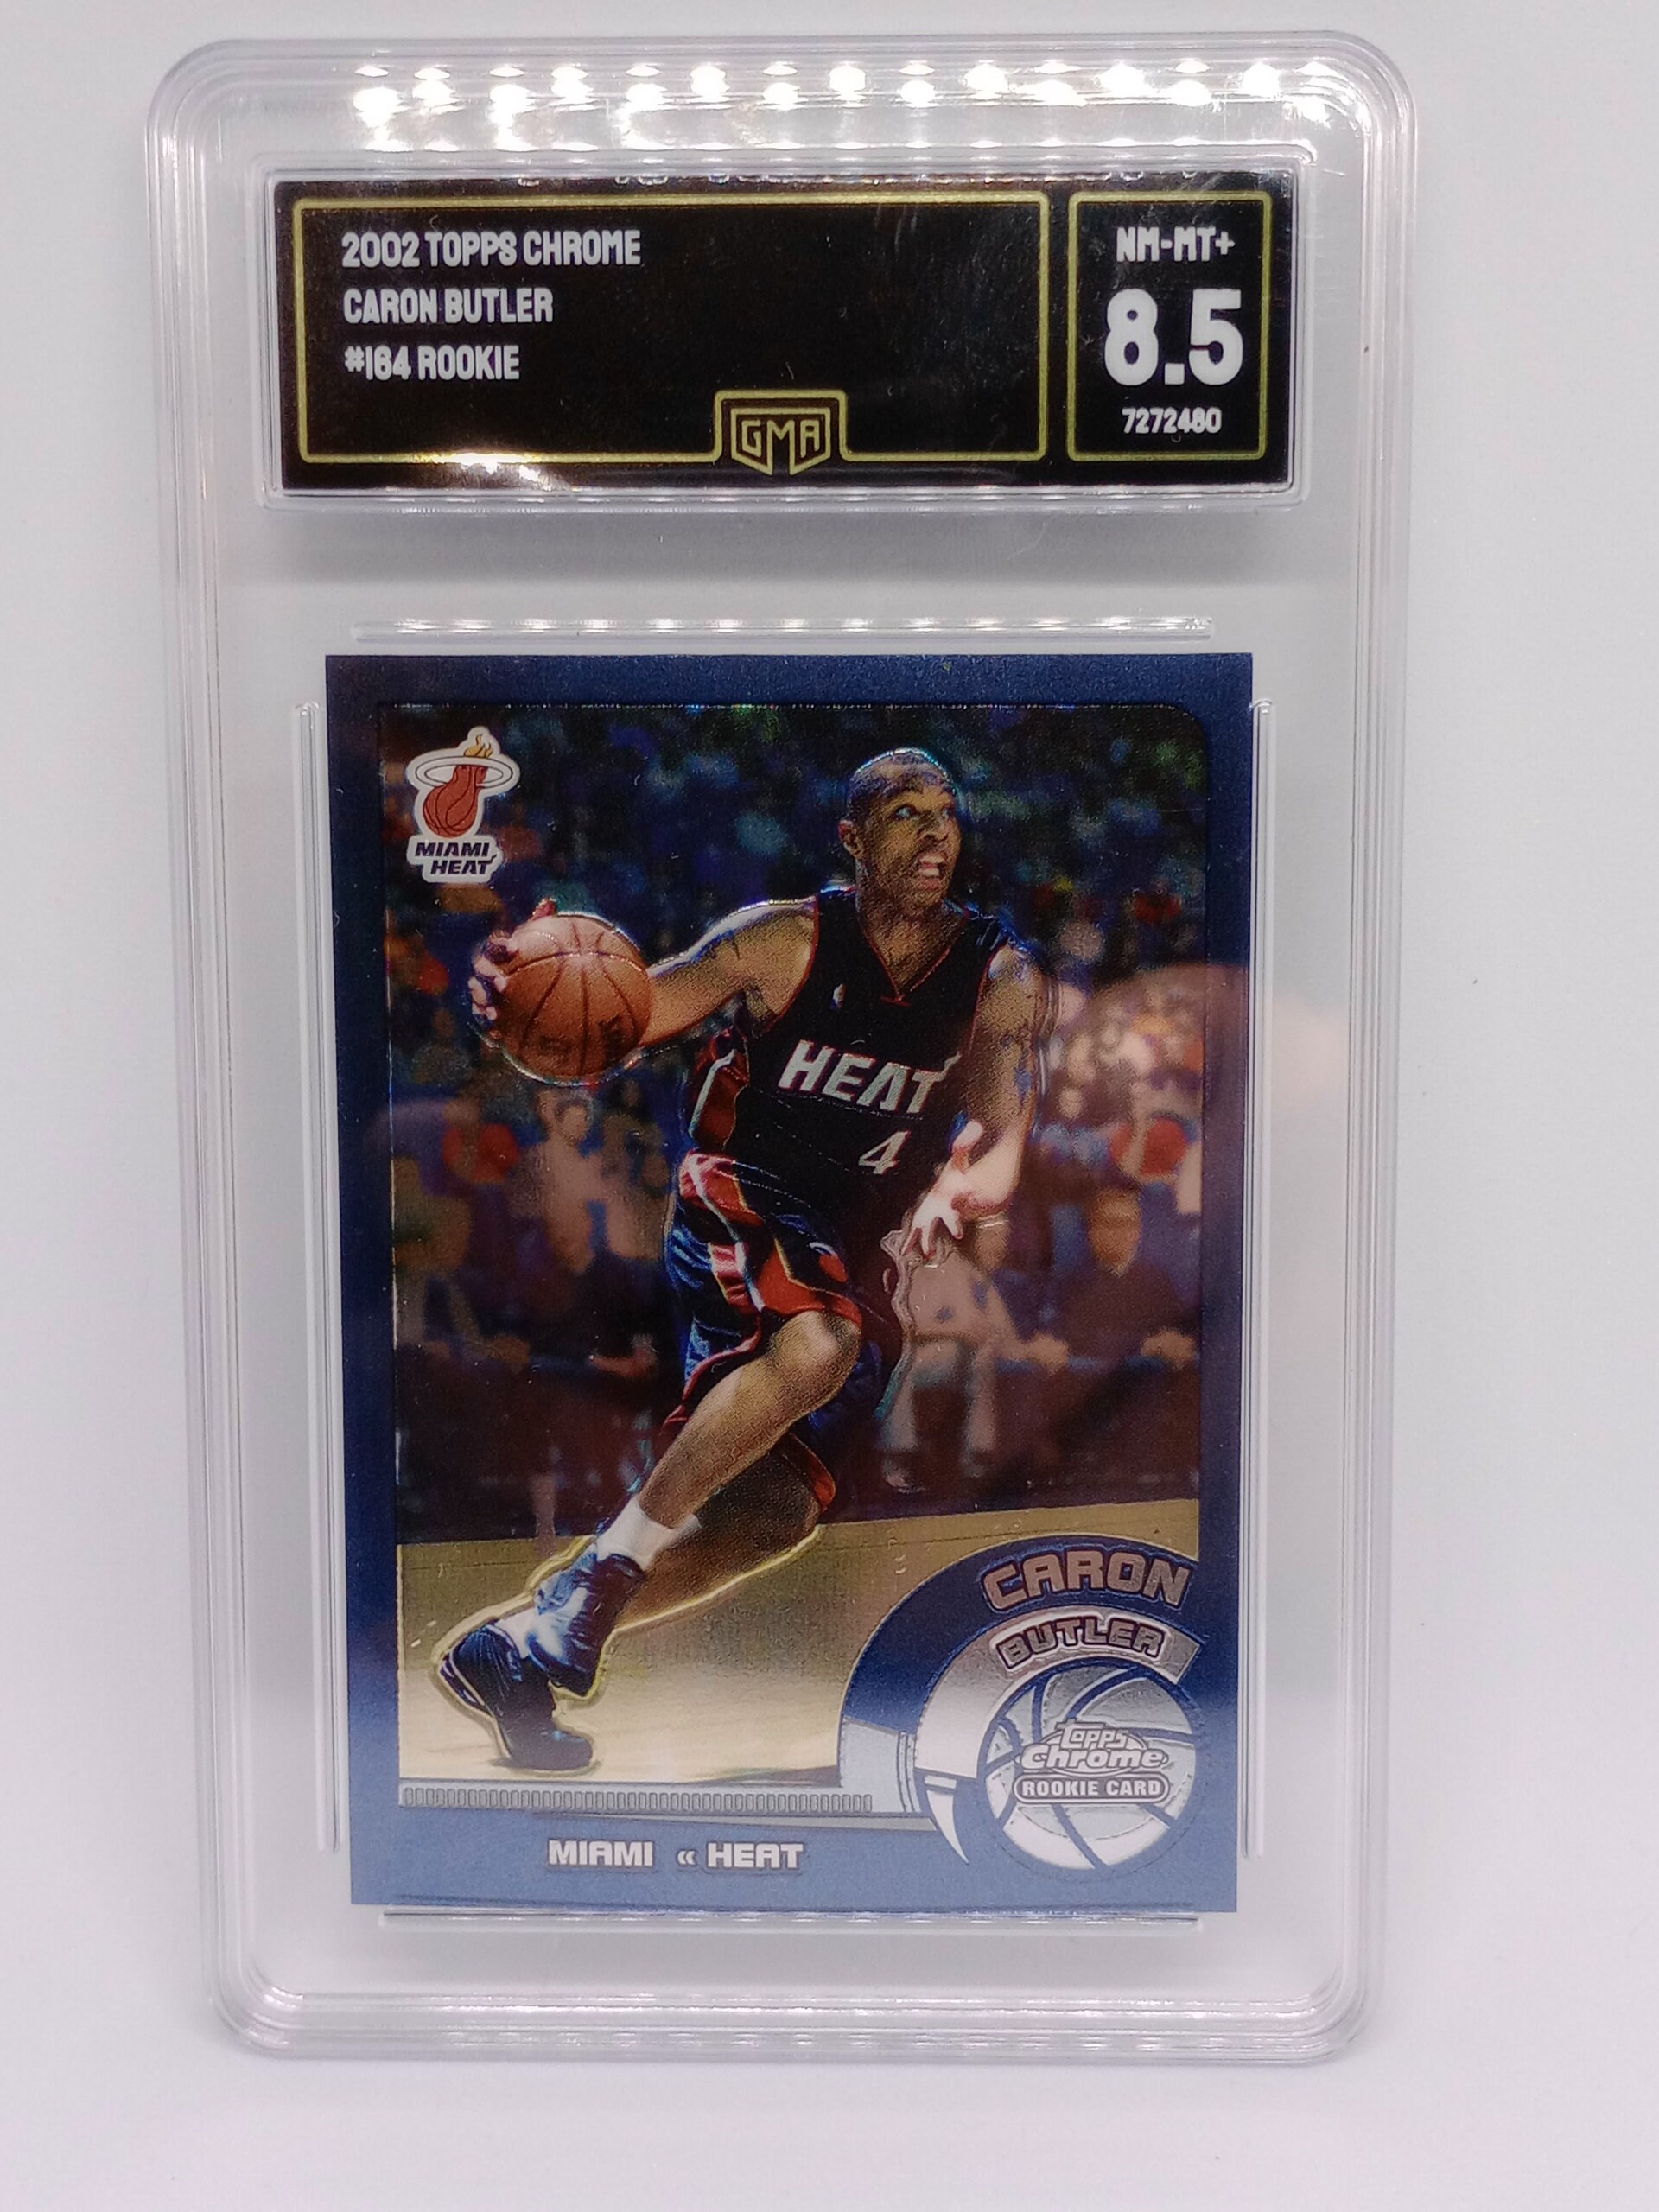 Stephen Curry 2009 Upper Deck Base #234 Price Guide - Sports Card Investor